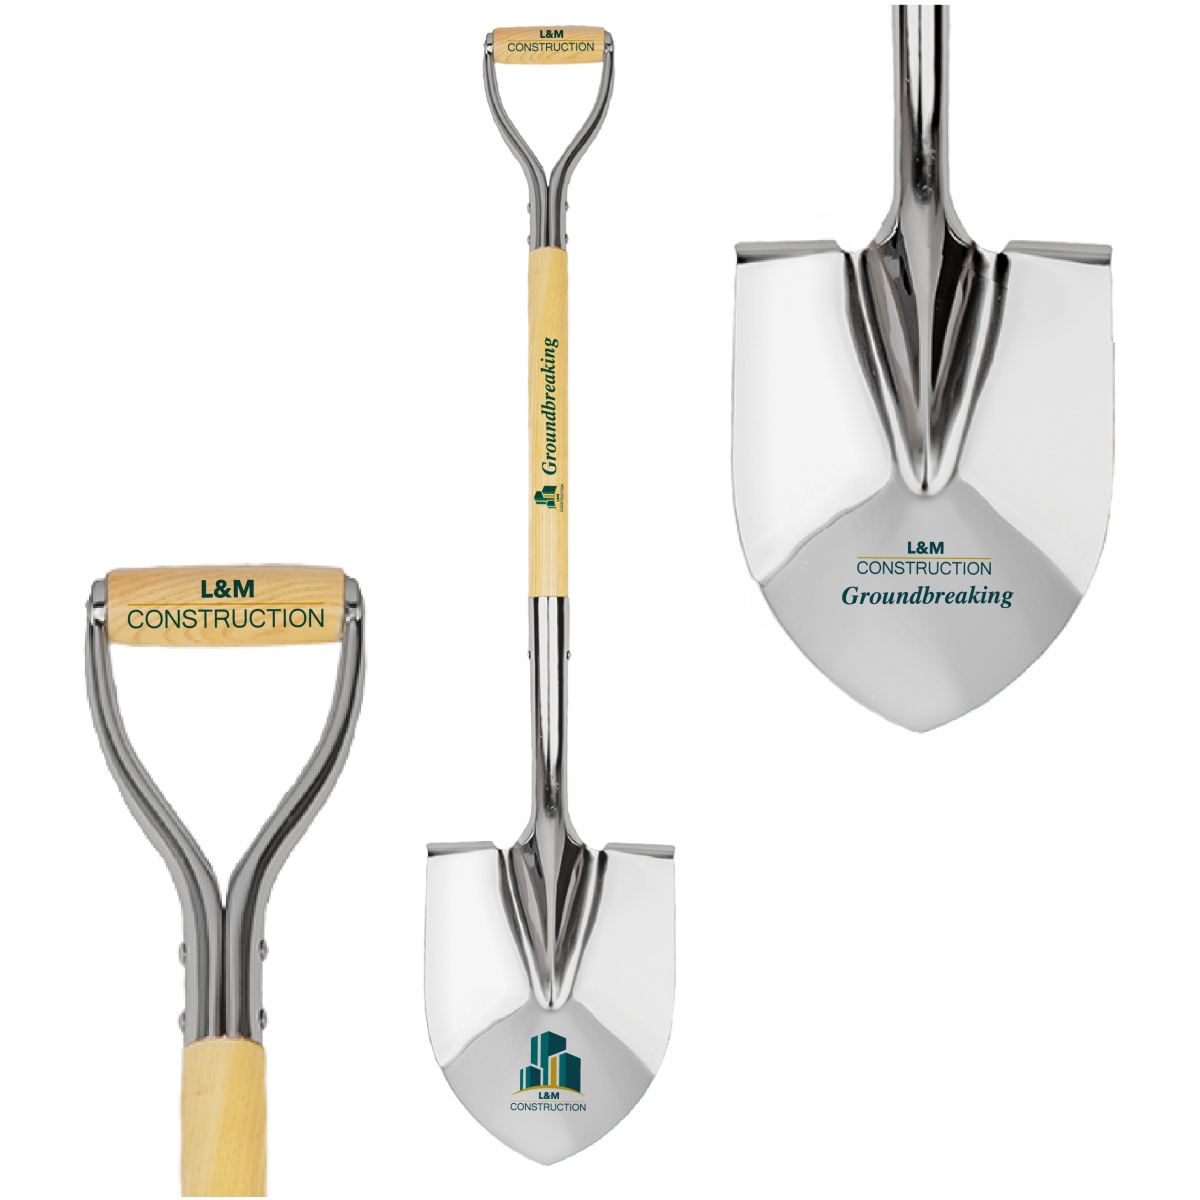 printed logo on the blade of a groundbreaking shovel